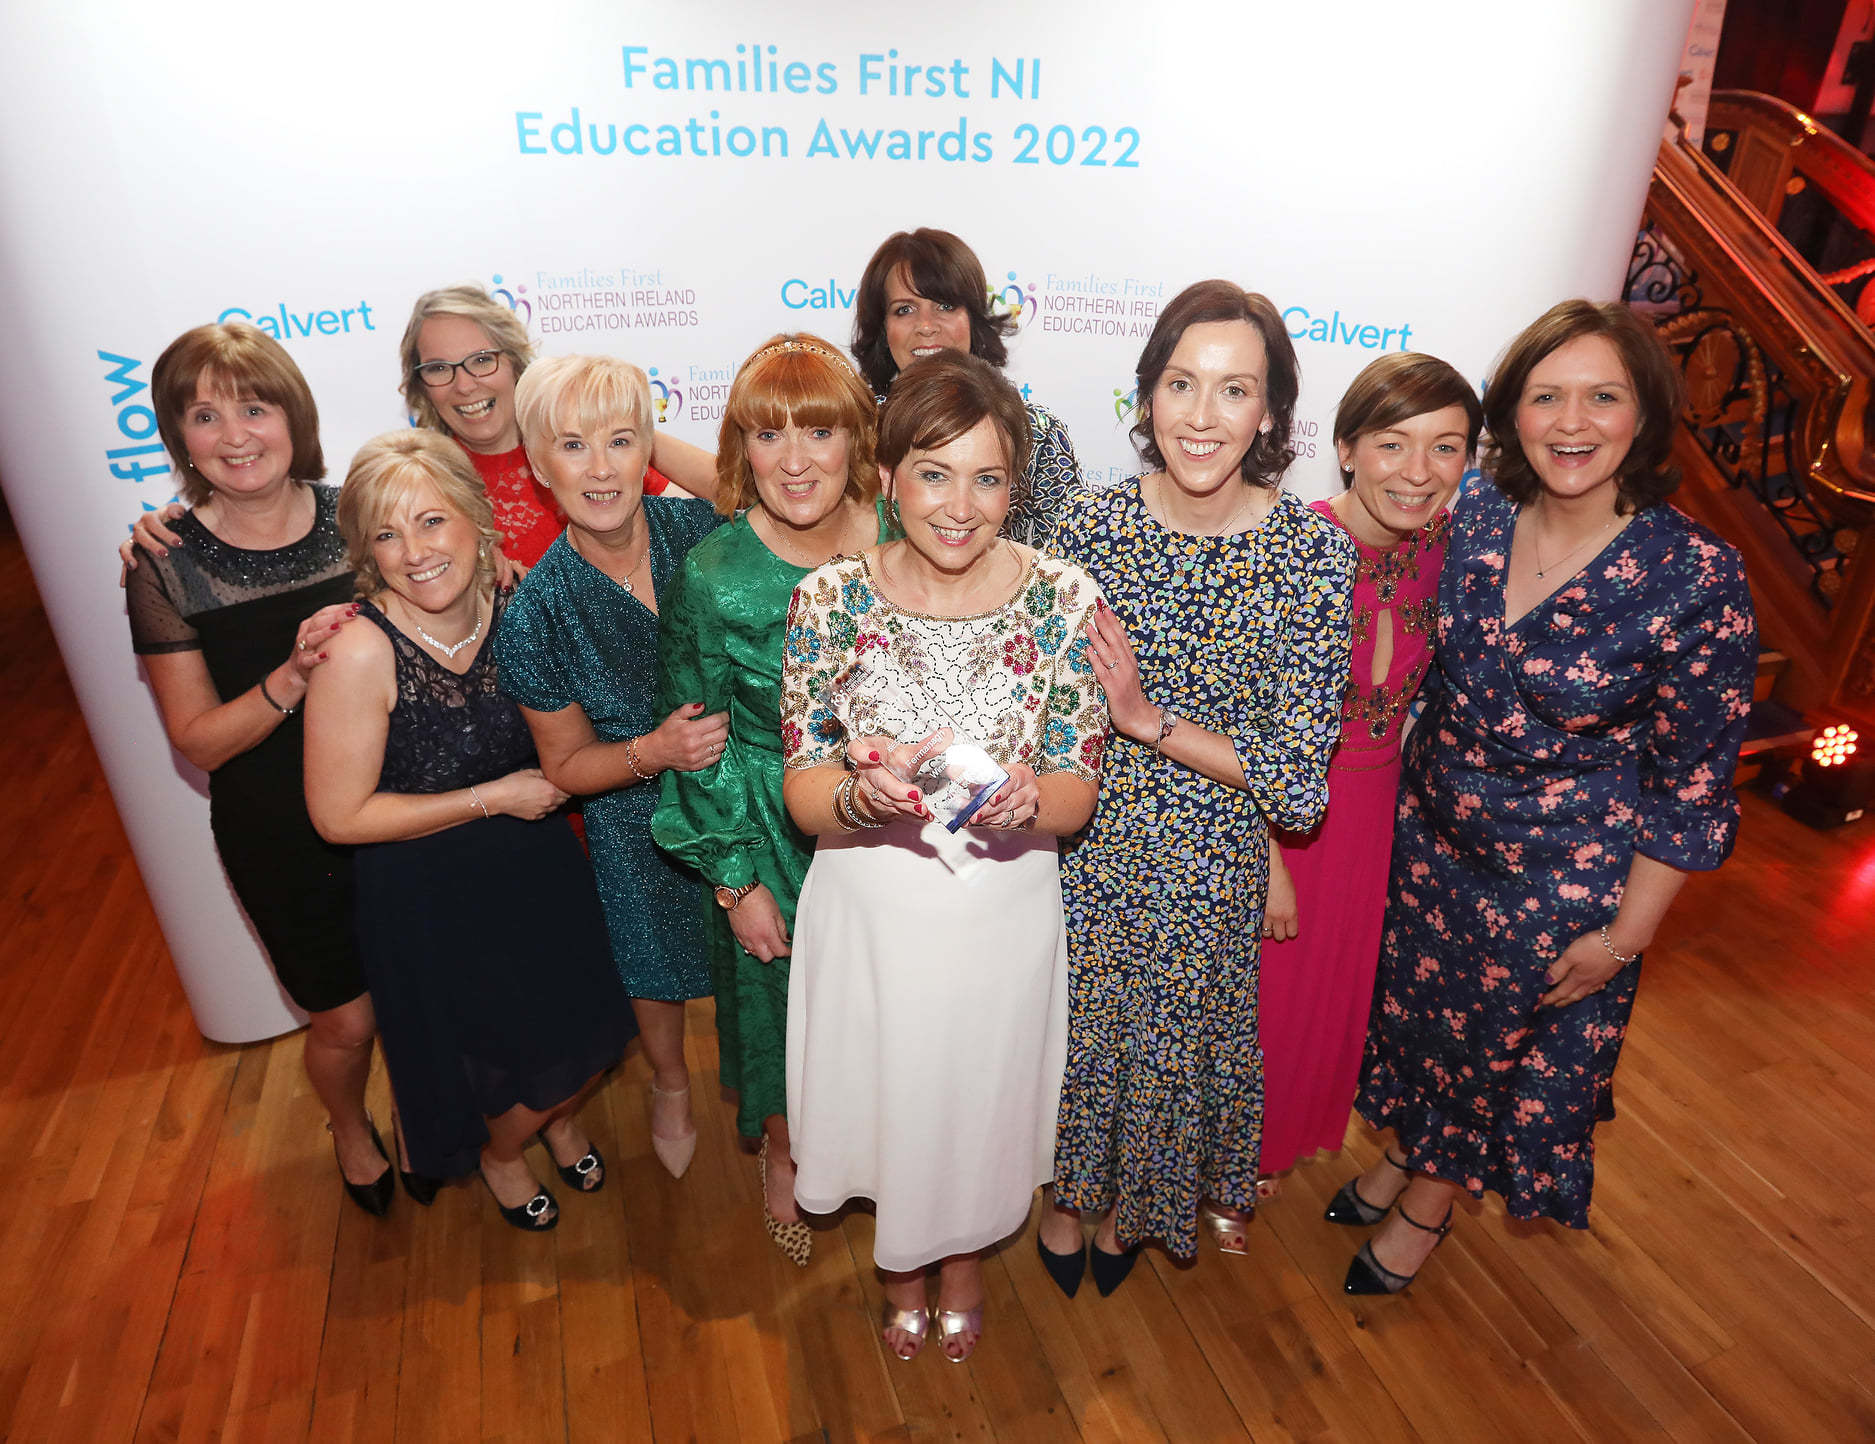 Maguiresbridge Primary School staff at the glittering Families First NI Education Awards 2022, held recently over in Belfast.